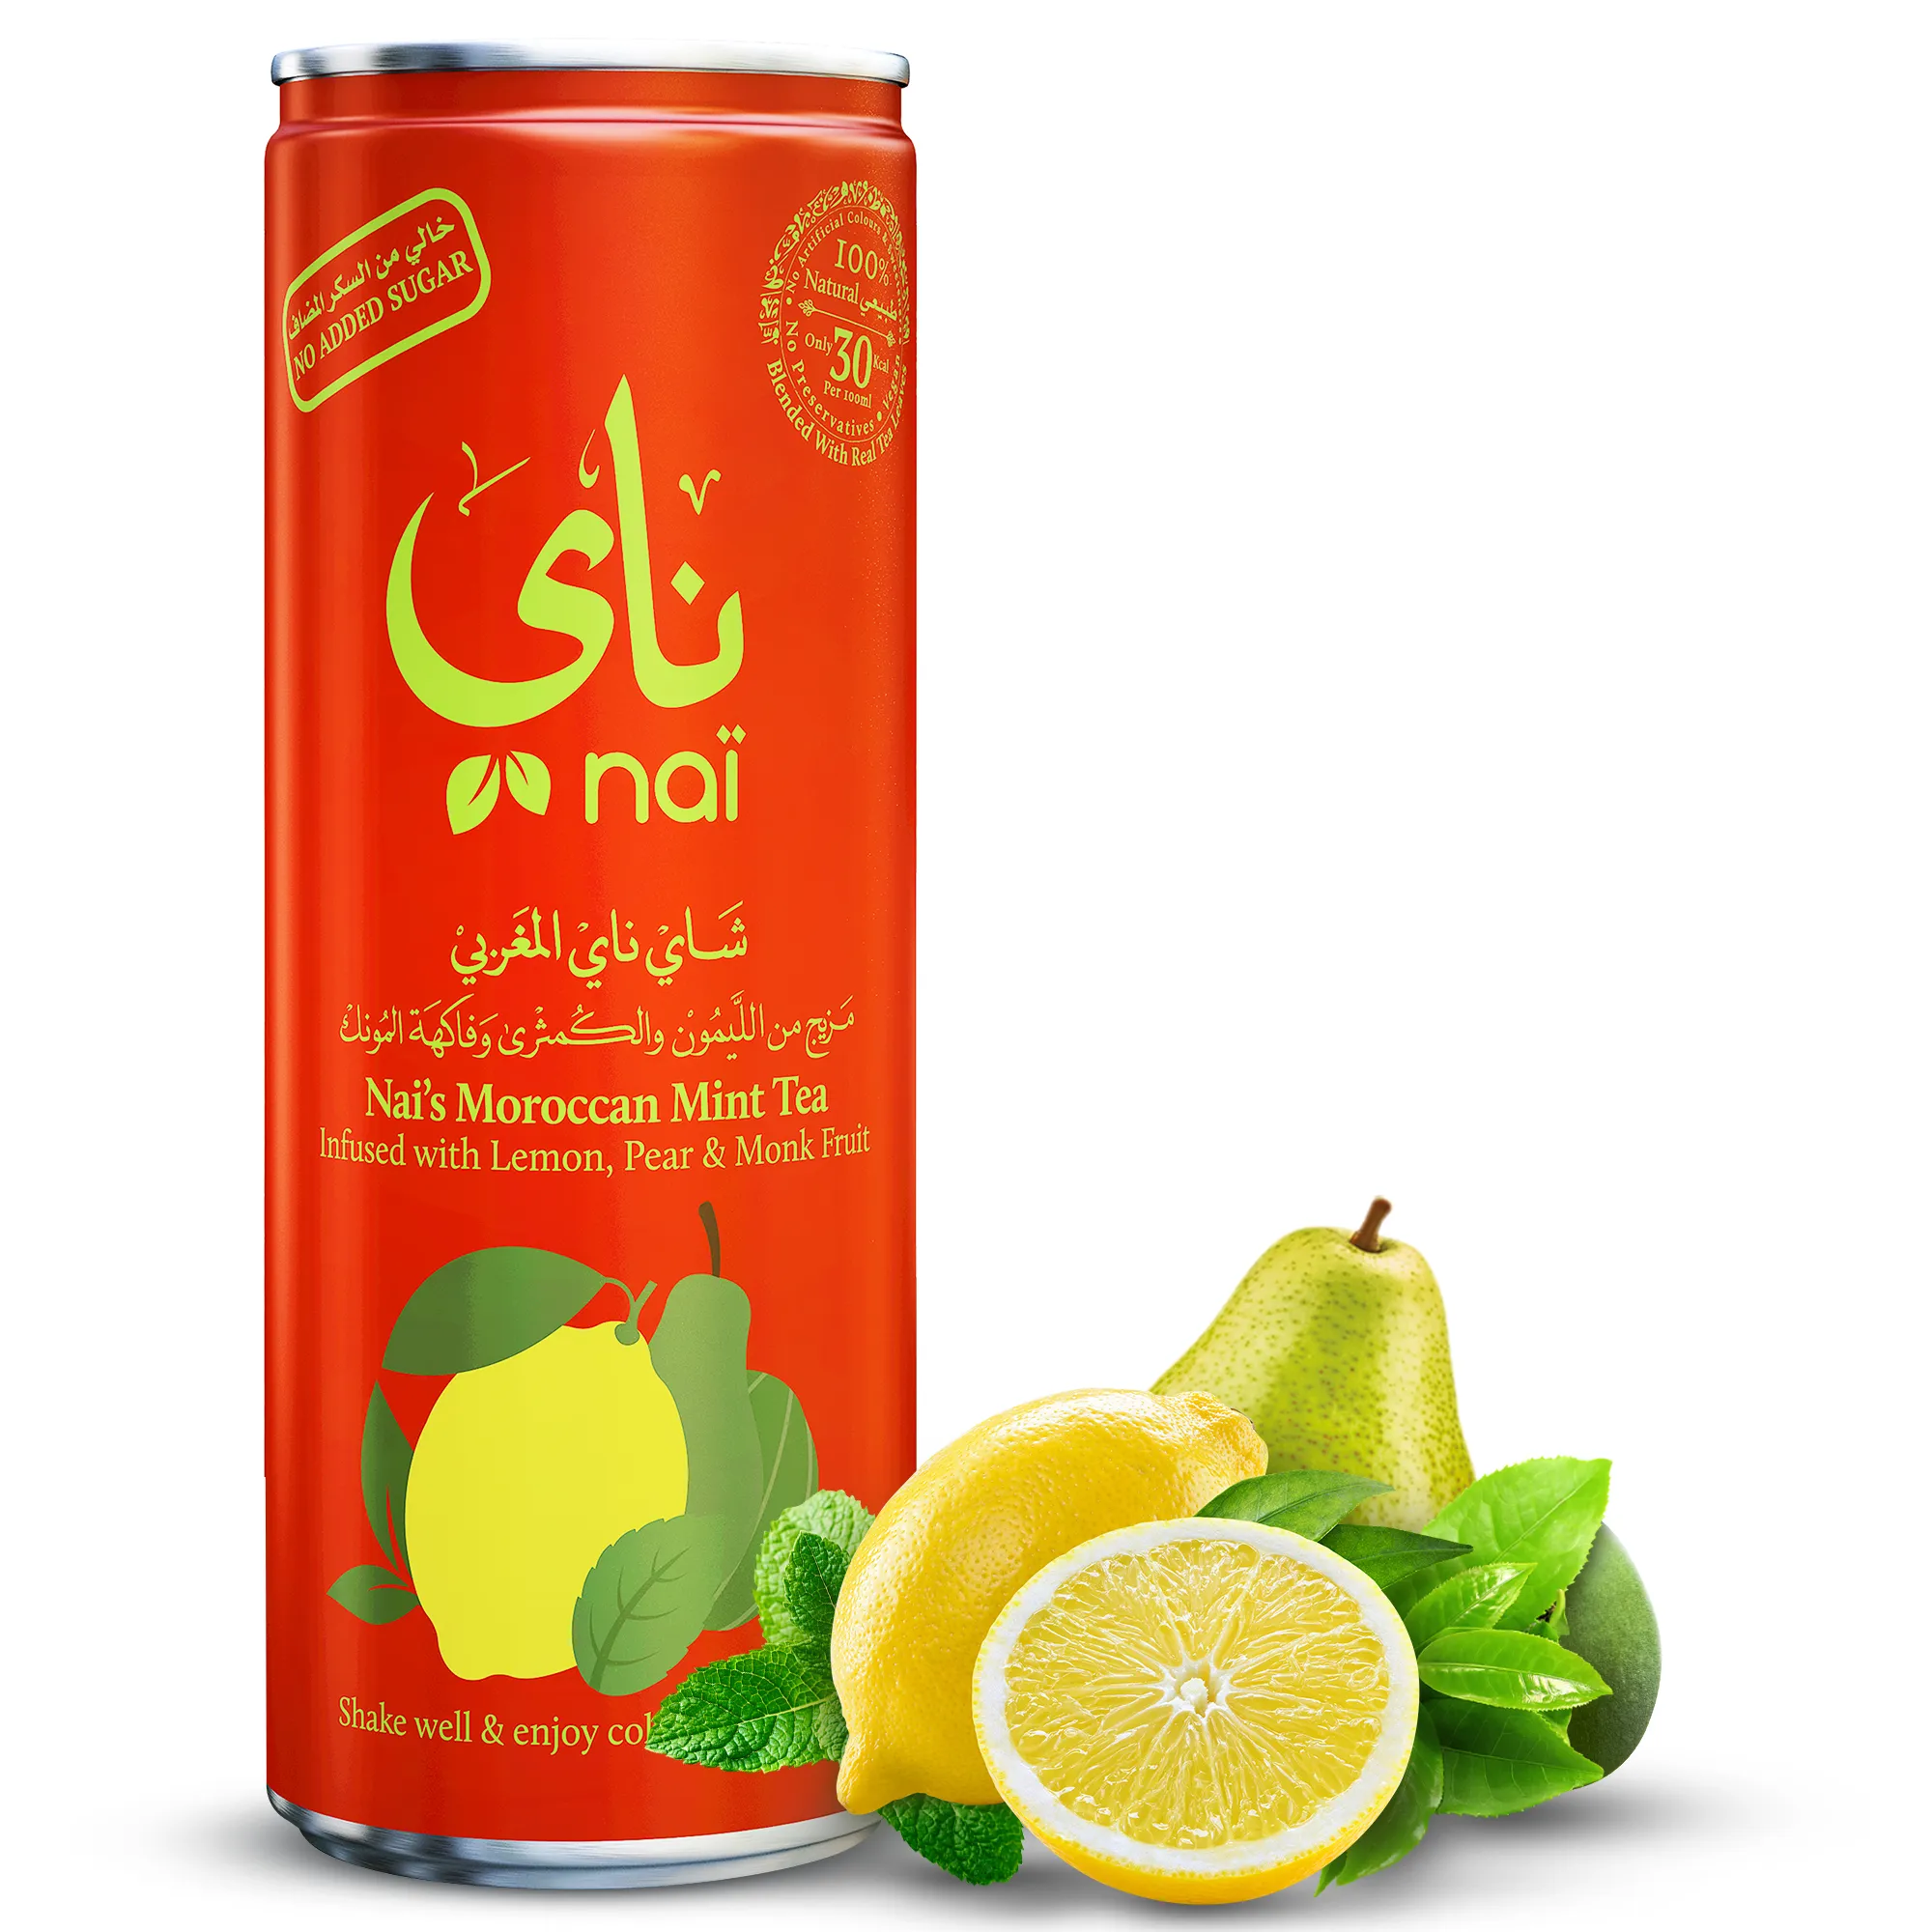 Nai s Moroccan Mint Tea, 100 Natural, Ready-to-Drink, 250ml Can